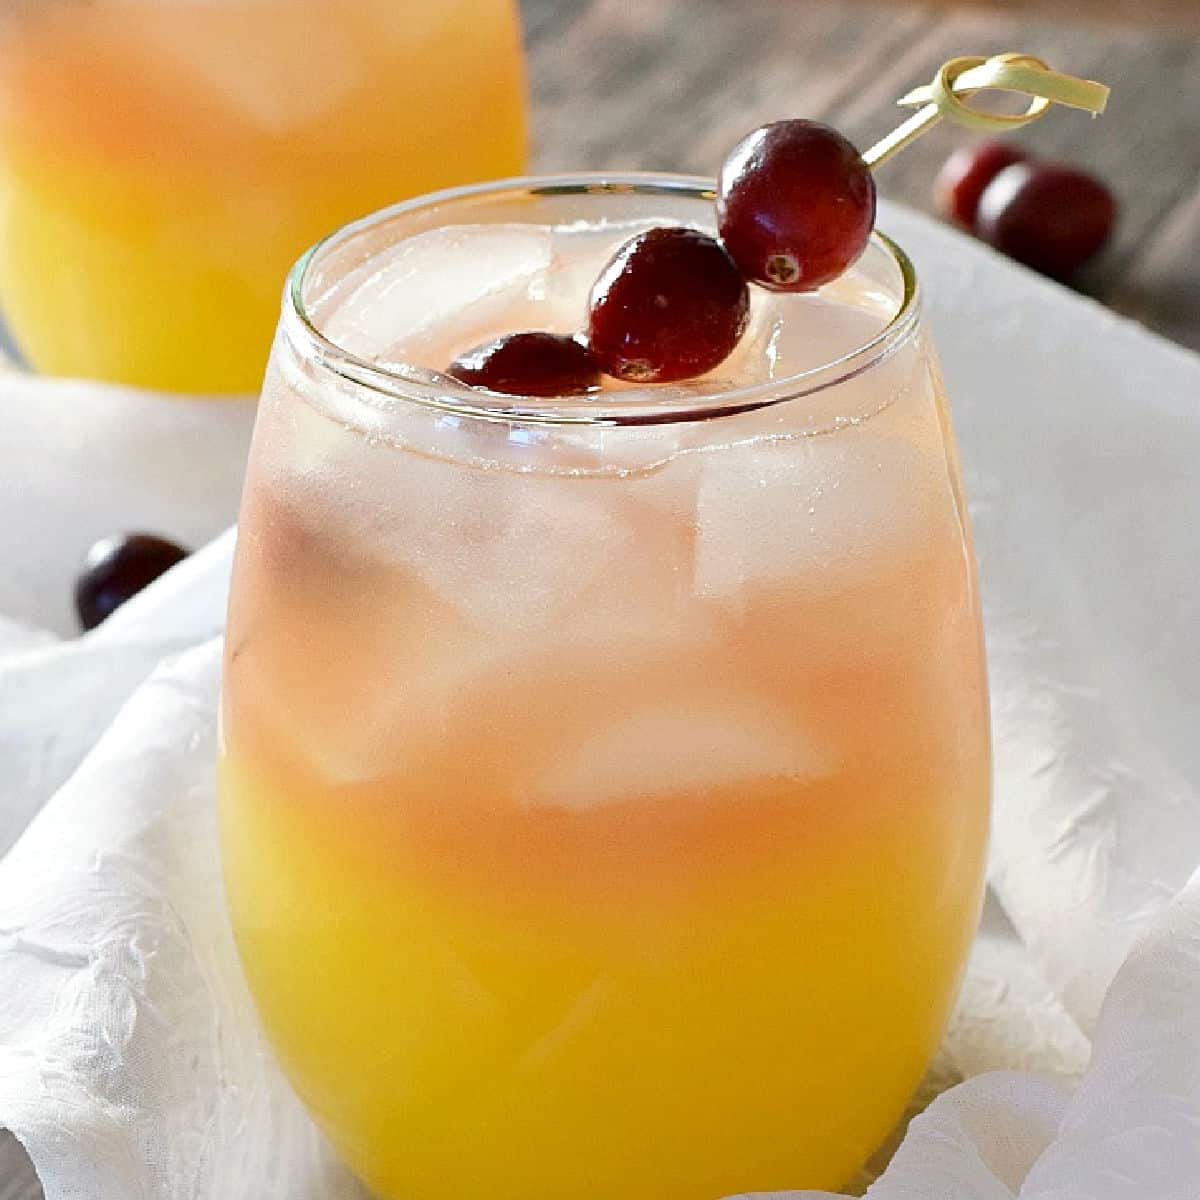 two small, clear glasses with orange on the bottom and peach colored on the top filled with ice cubes and garnished with cranberries on a bamboo stick.